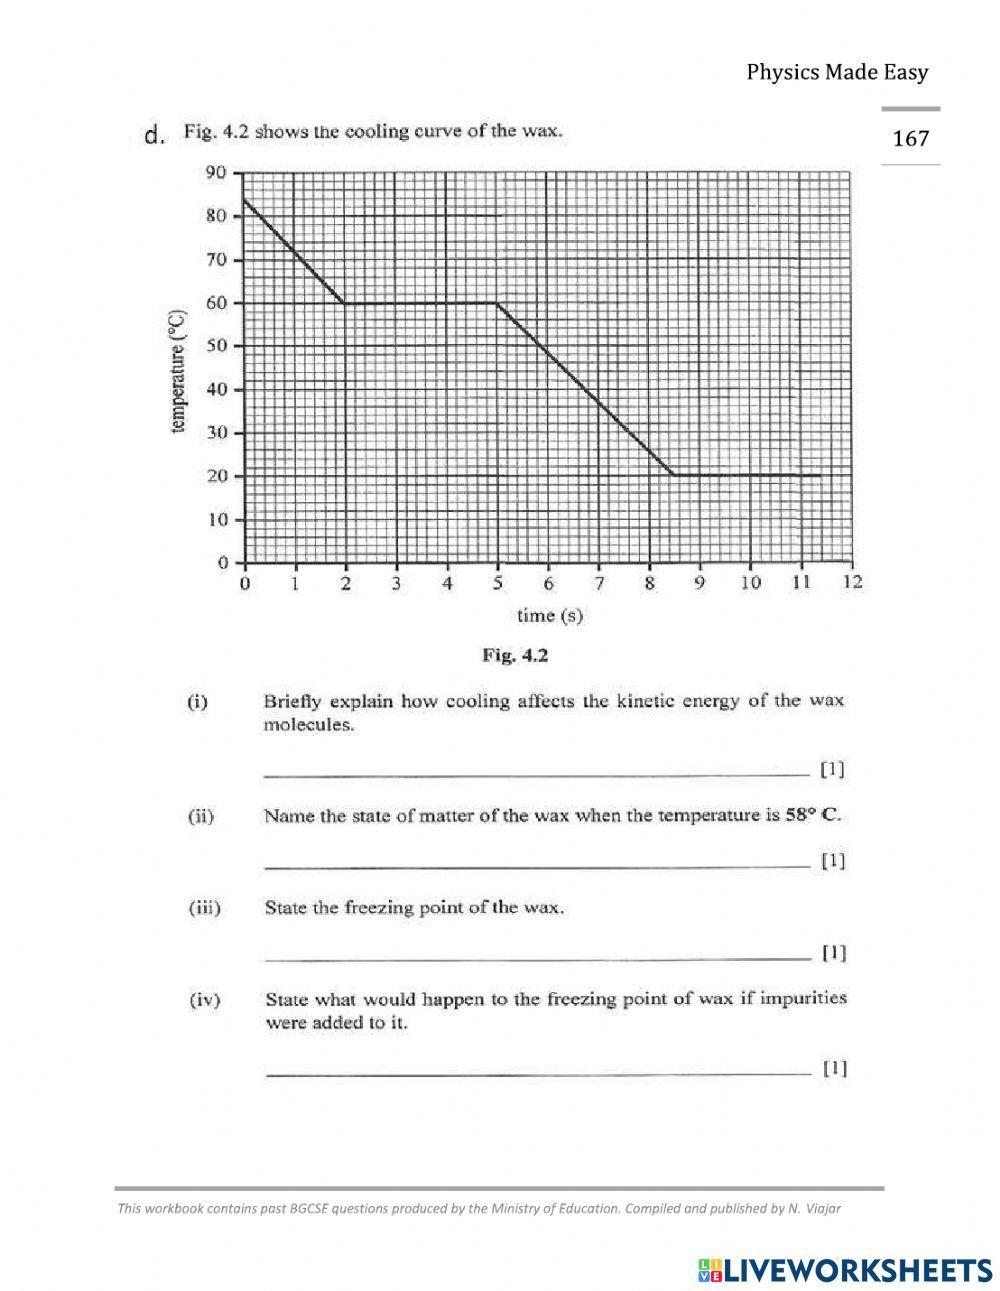 Interpreting a Heating and Cooling Curve